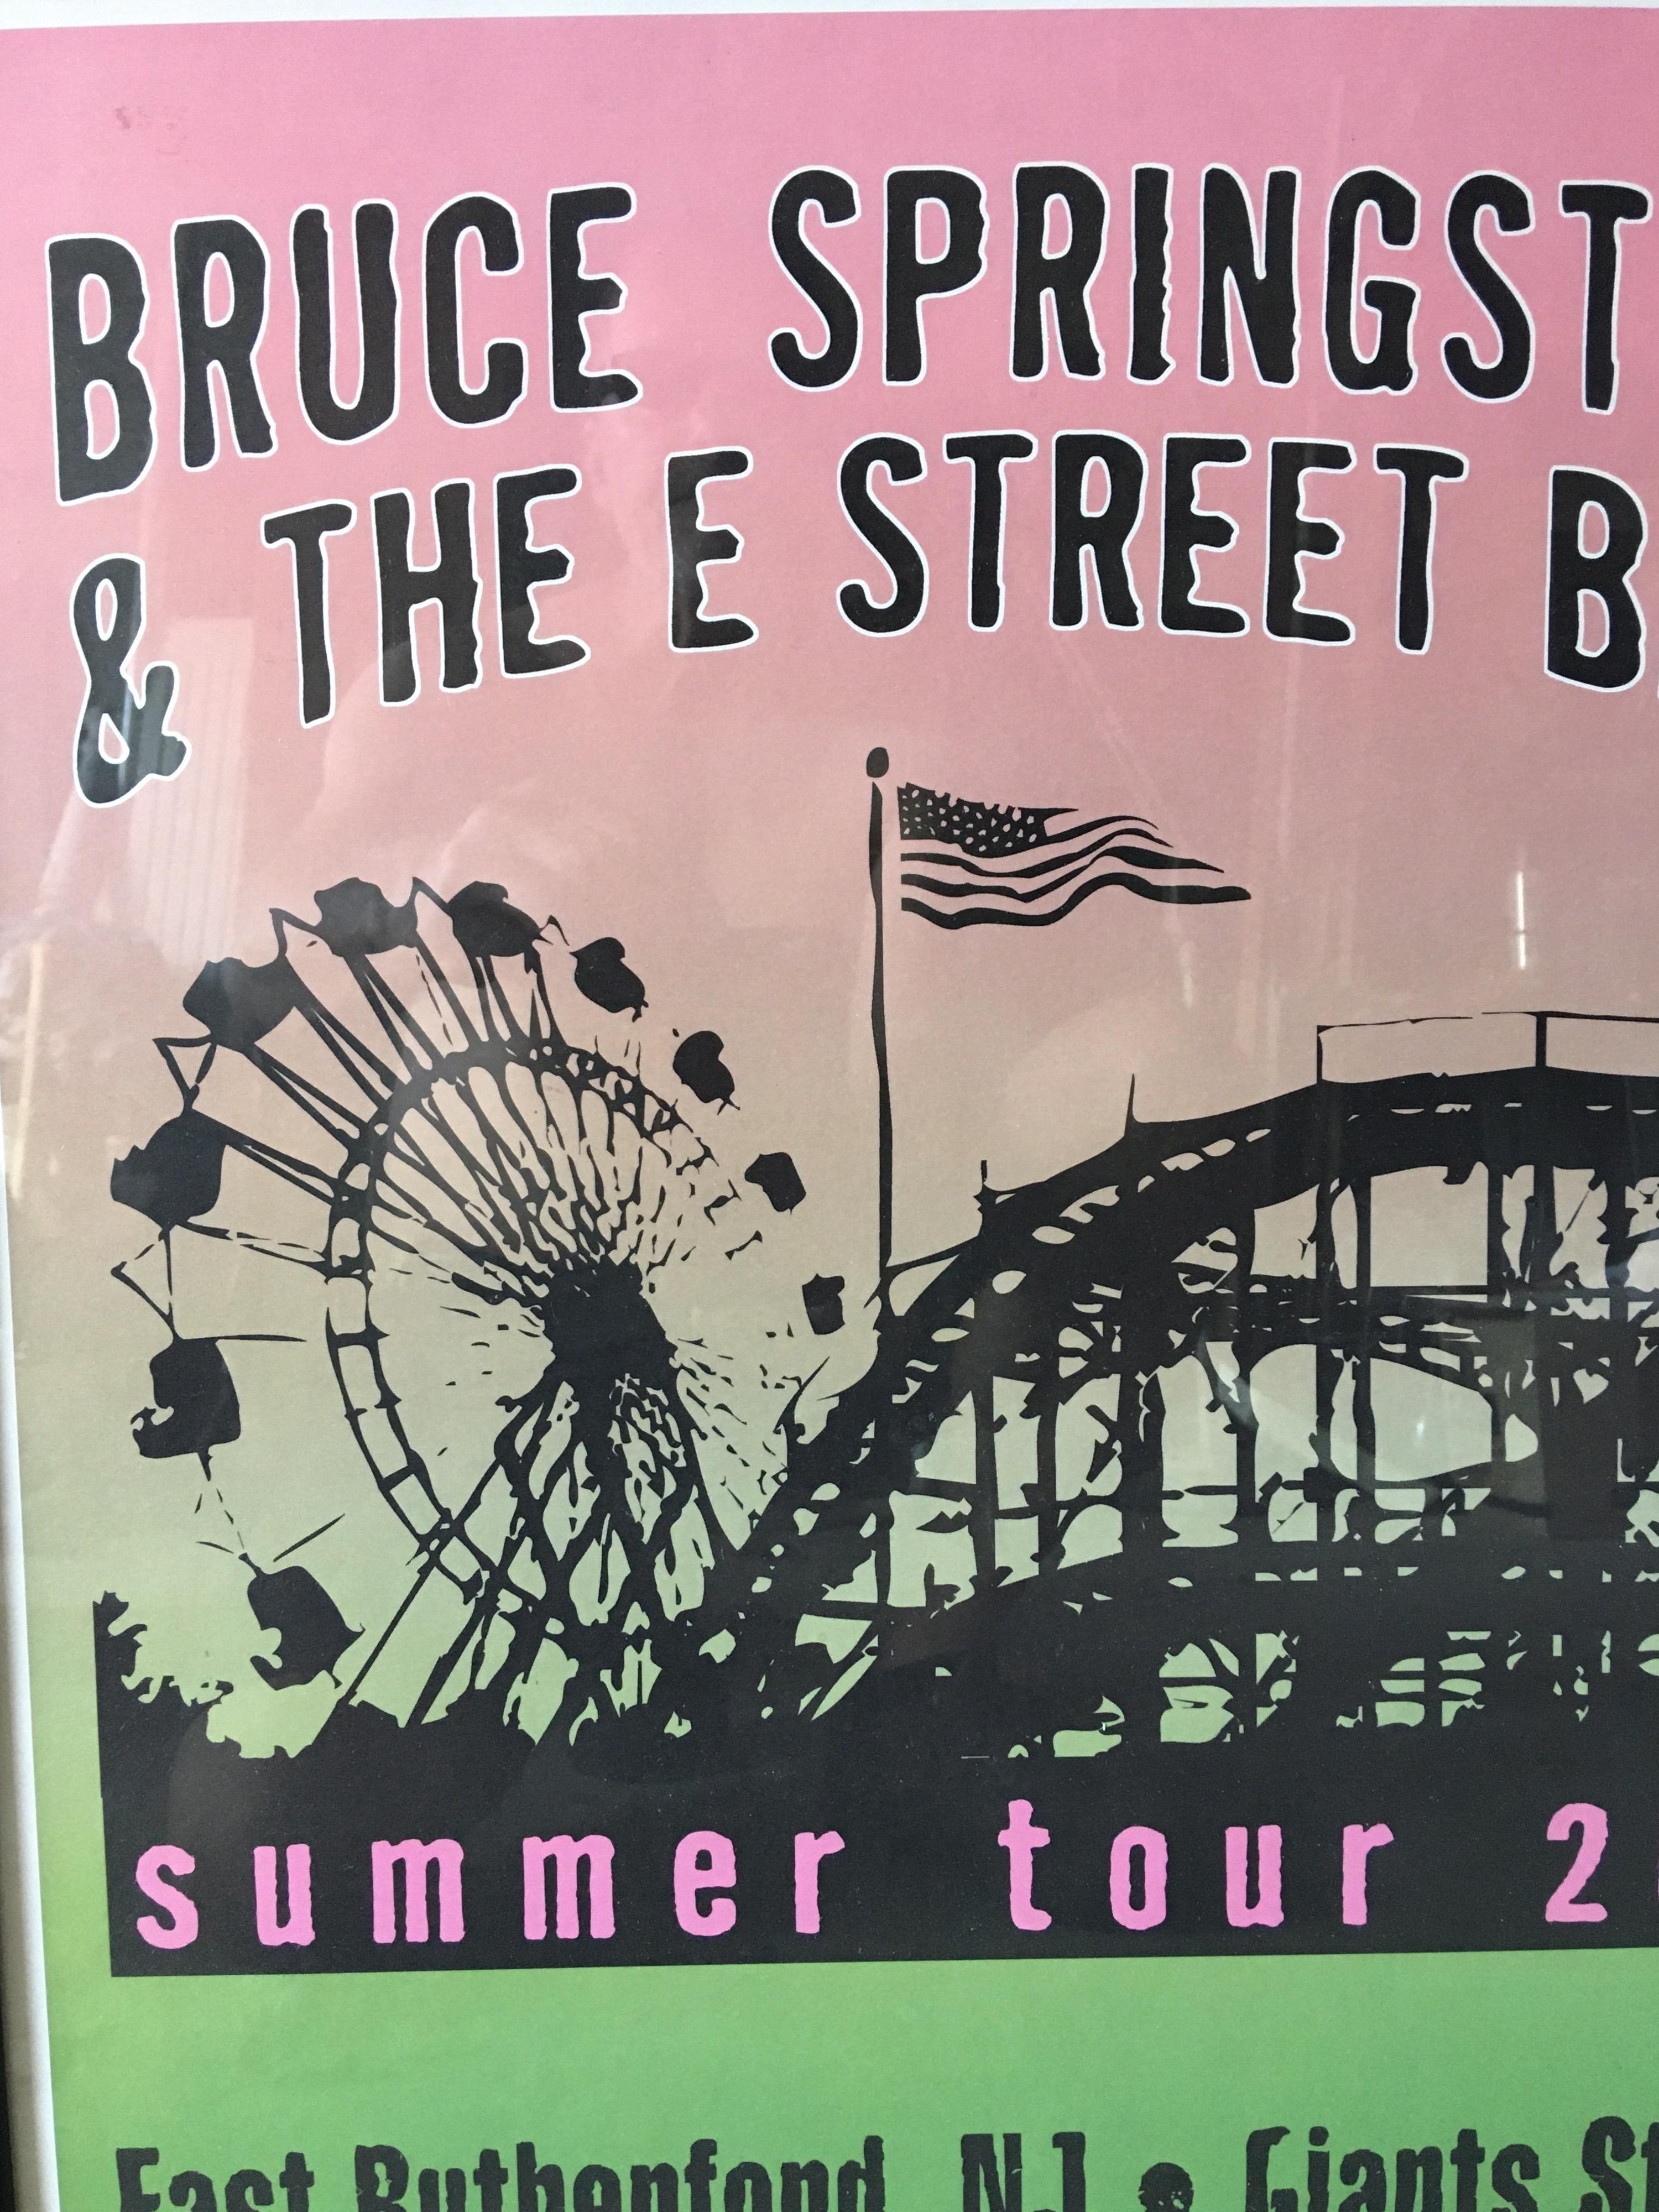 springsteen on broadway poster